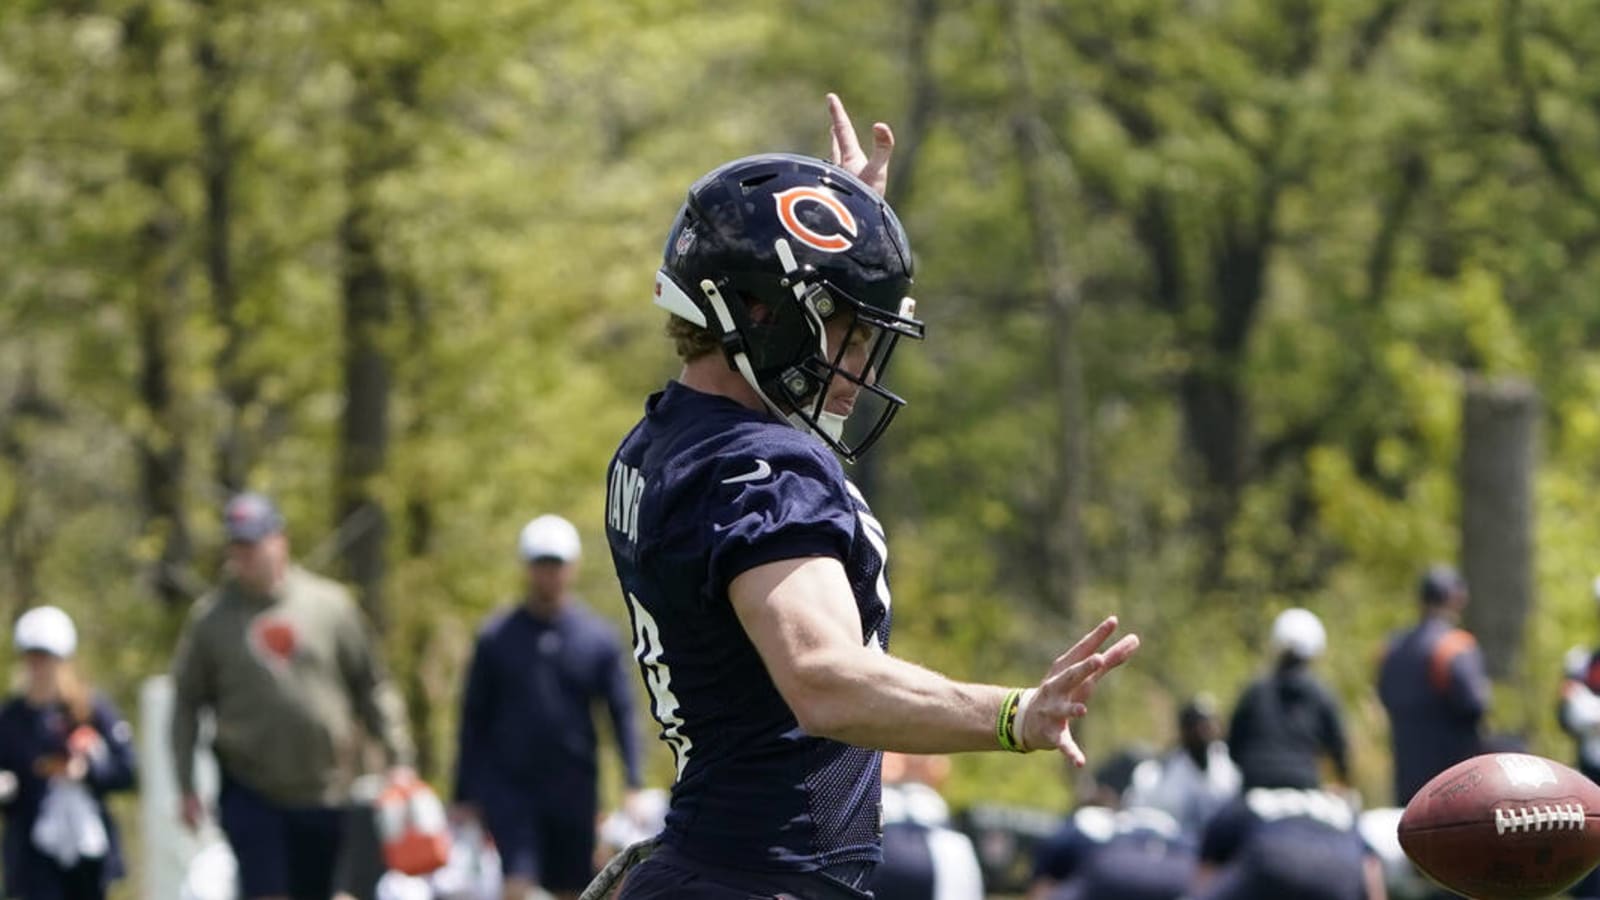 Bears punter Tory Taylor being considered for kickoffs as the rookie displays 'rare' talent